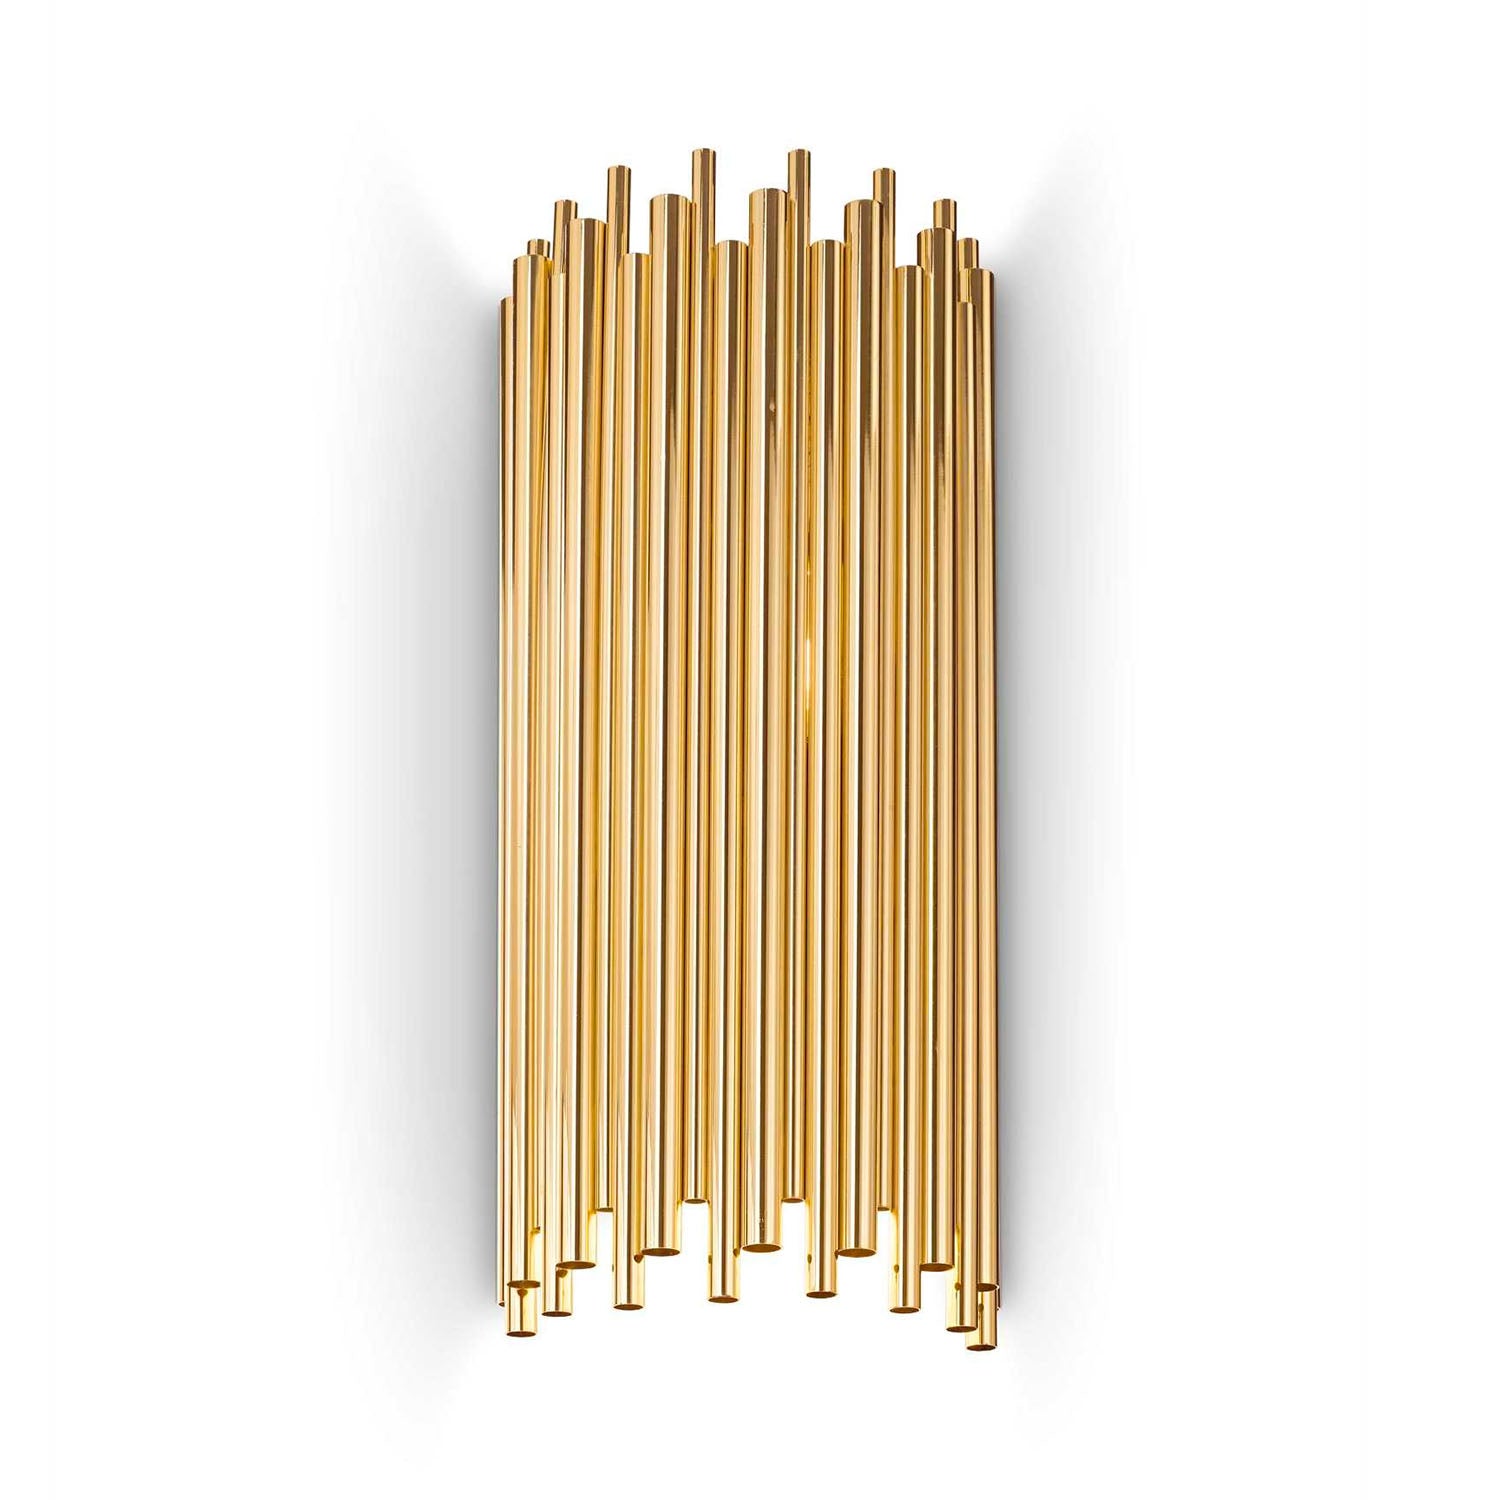 PAN - Gold tube wall light in art deco style